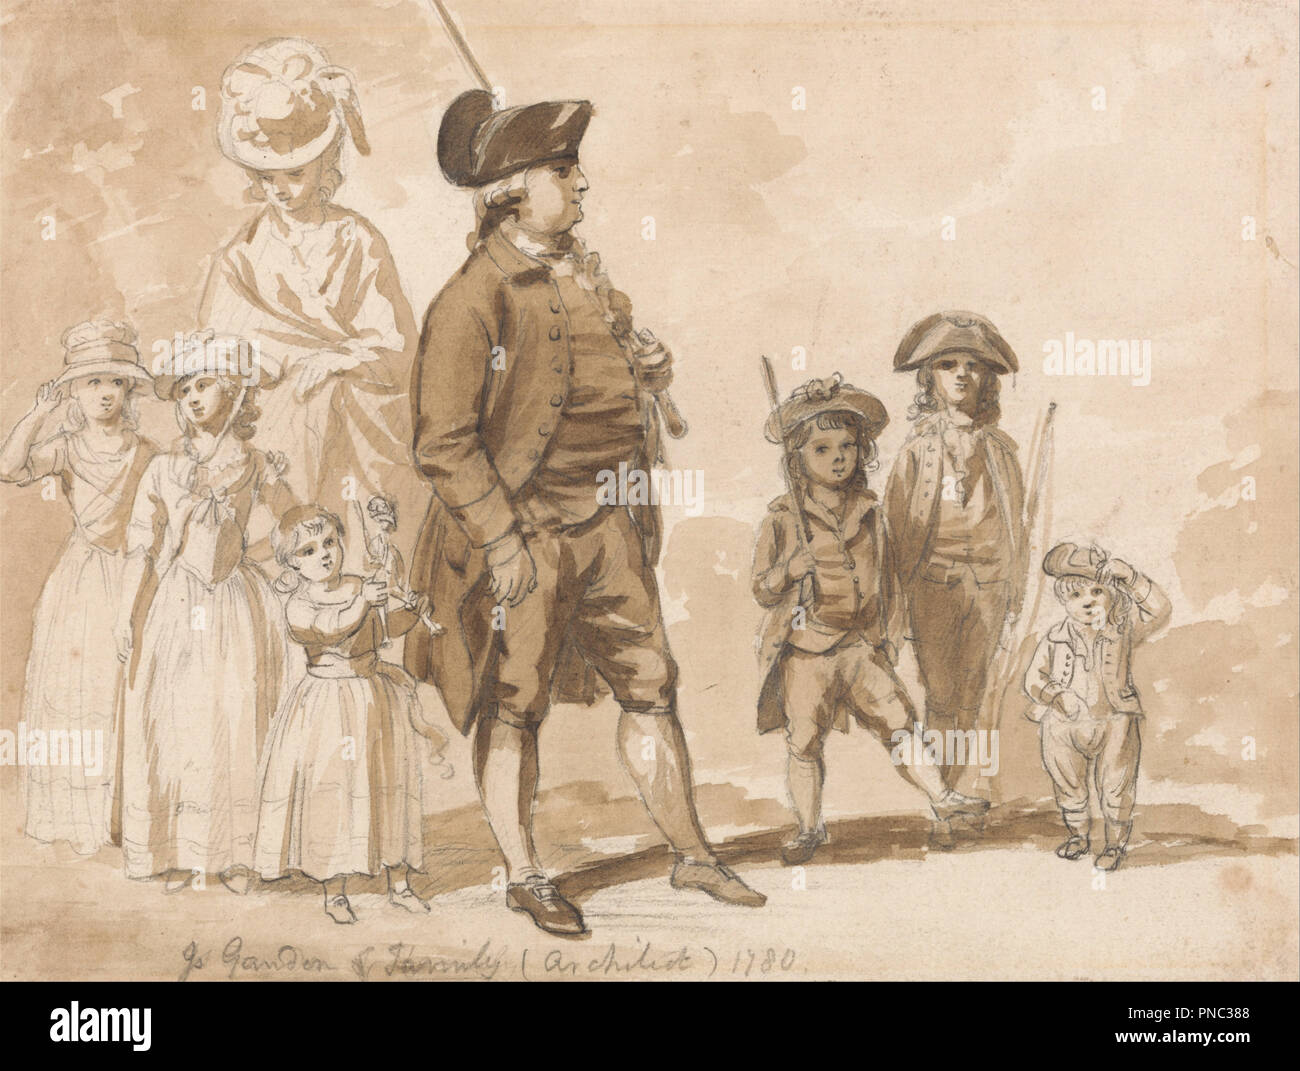 James Gandon and Family. Date/Period: 1780. Portrait. Brown wash and brown ink over graphite on medium, cream, slightly textured wove paper. Height: 146 mm (5.74 in); Width: 194 mm (7.63 in). Author: Paul Sandby. Stock Photo